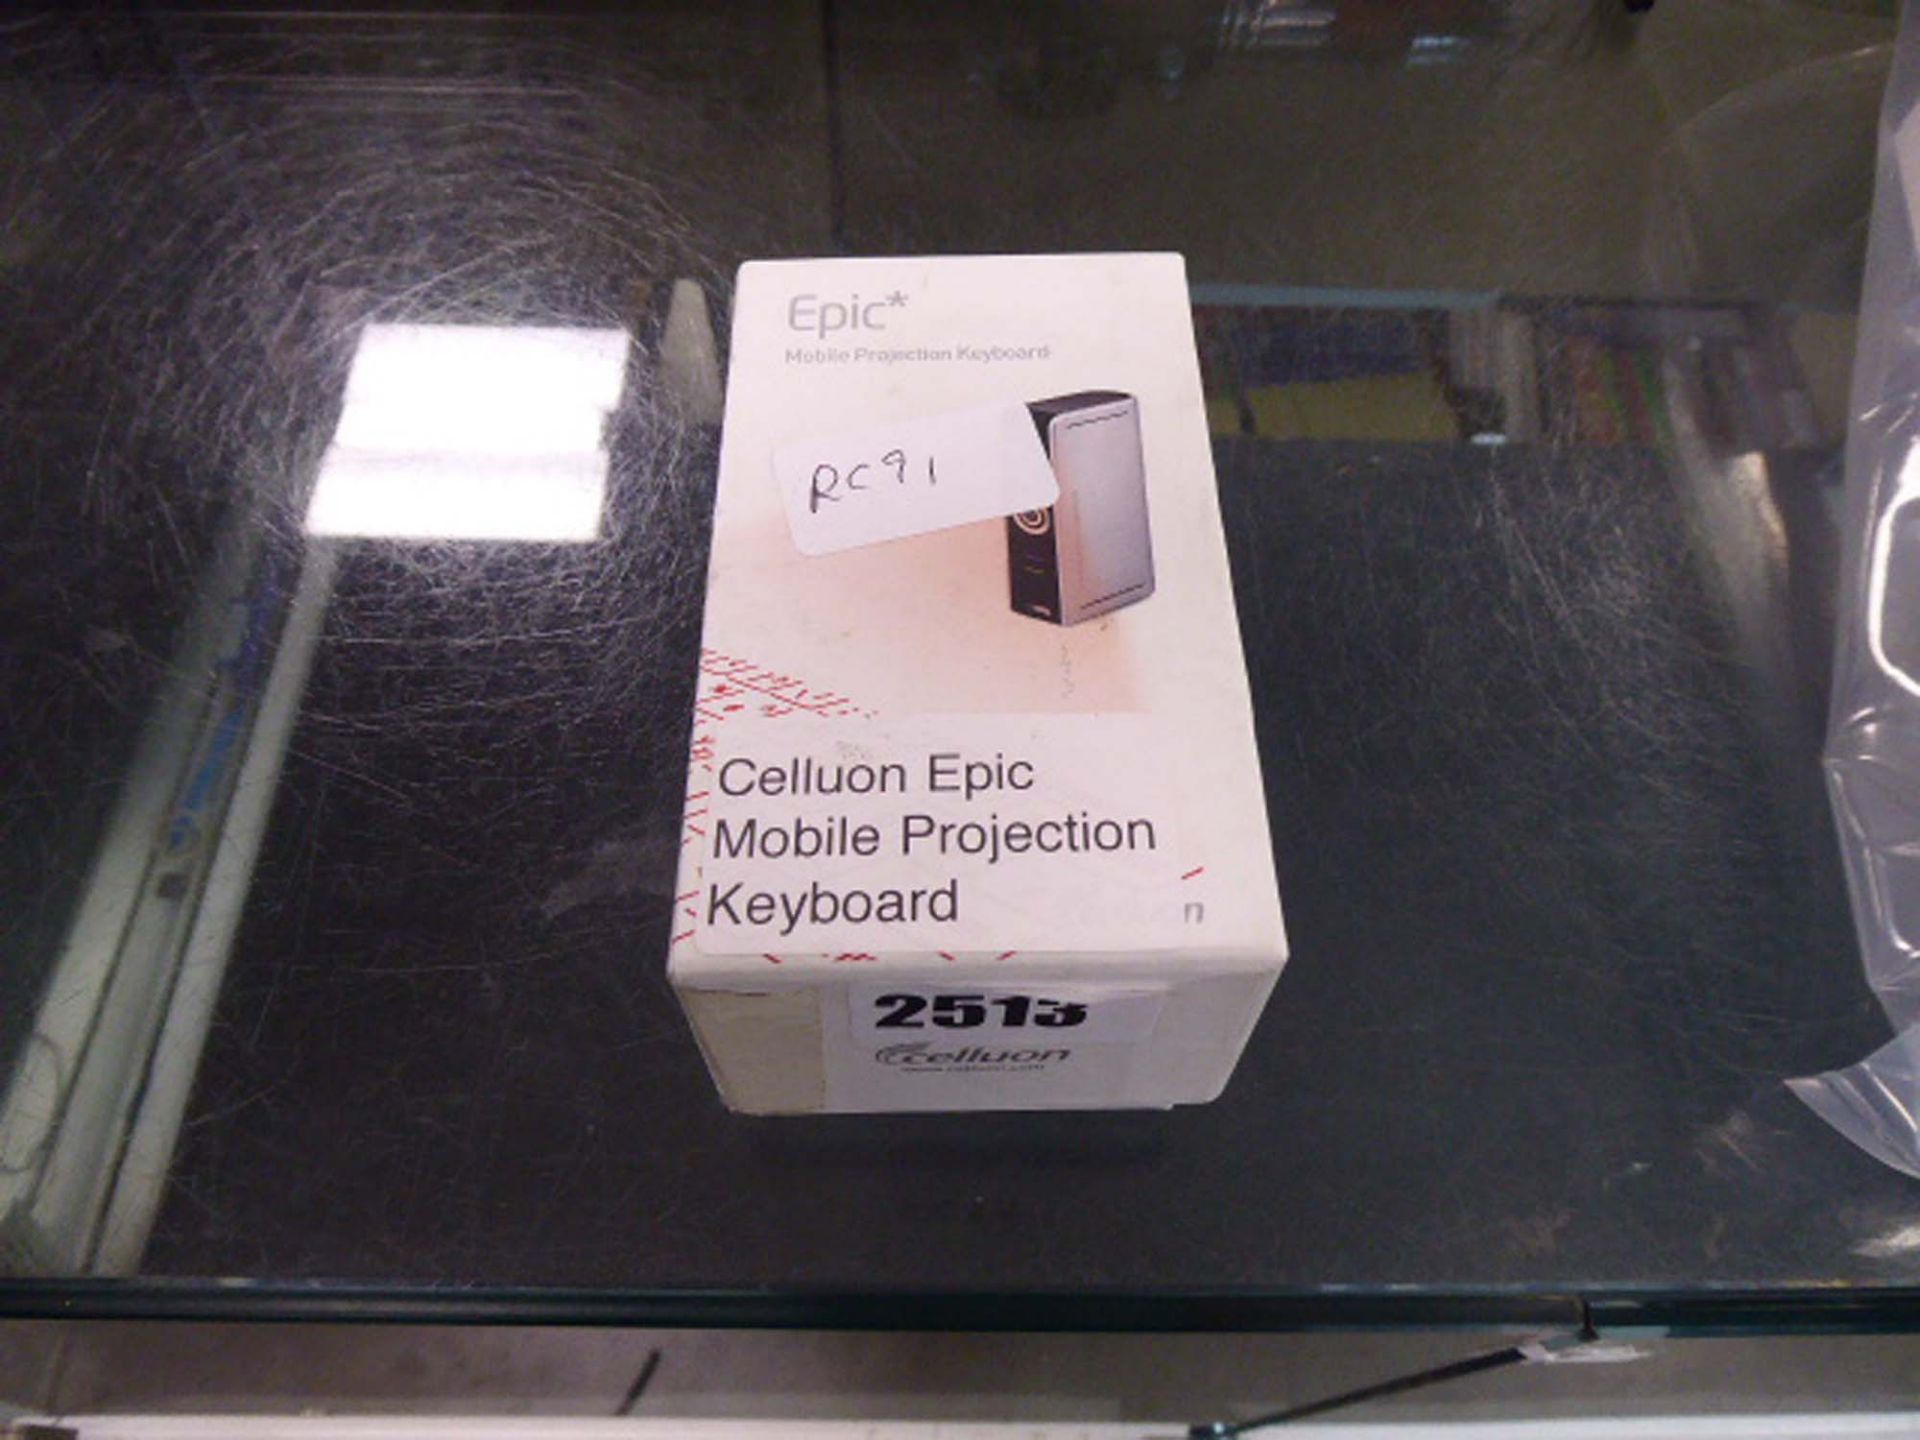 Epic mobile projection keyboard in box